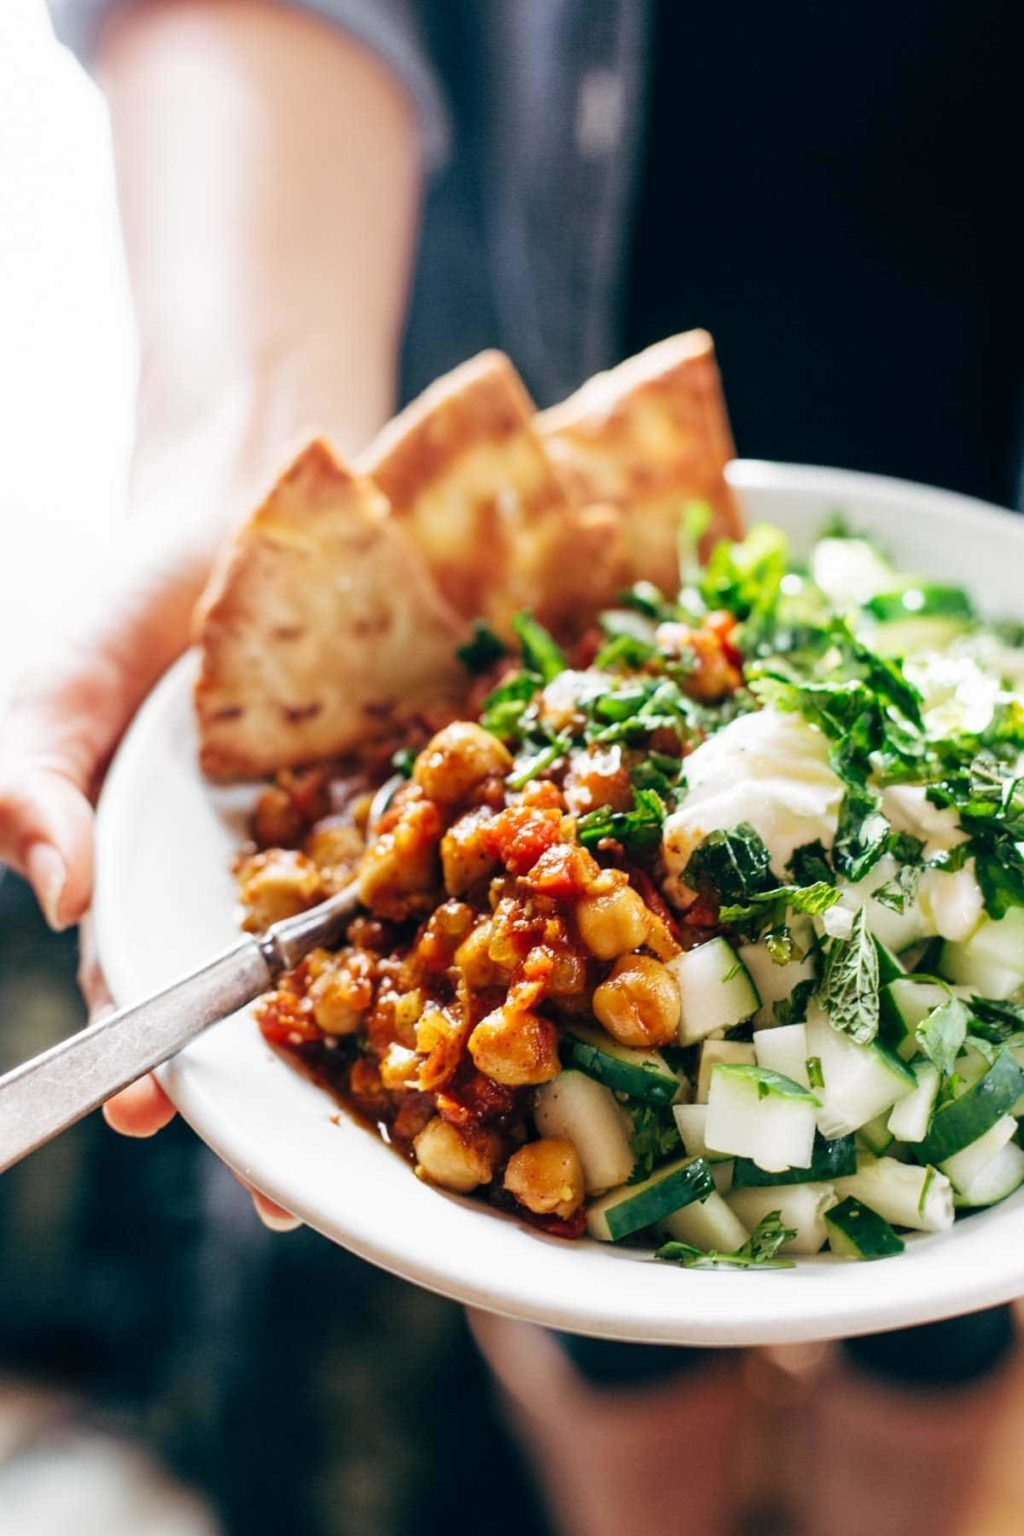 Freezer Meal Spiced Chickpea Bowls Recipe - Pinch of Yum